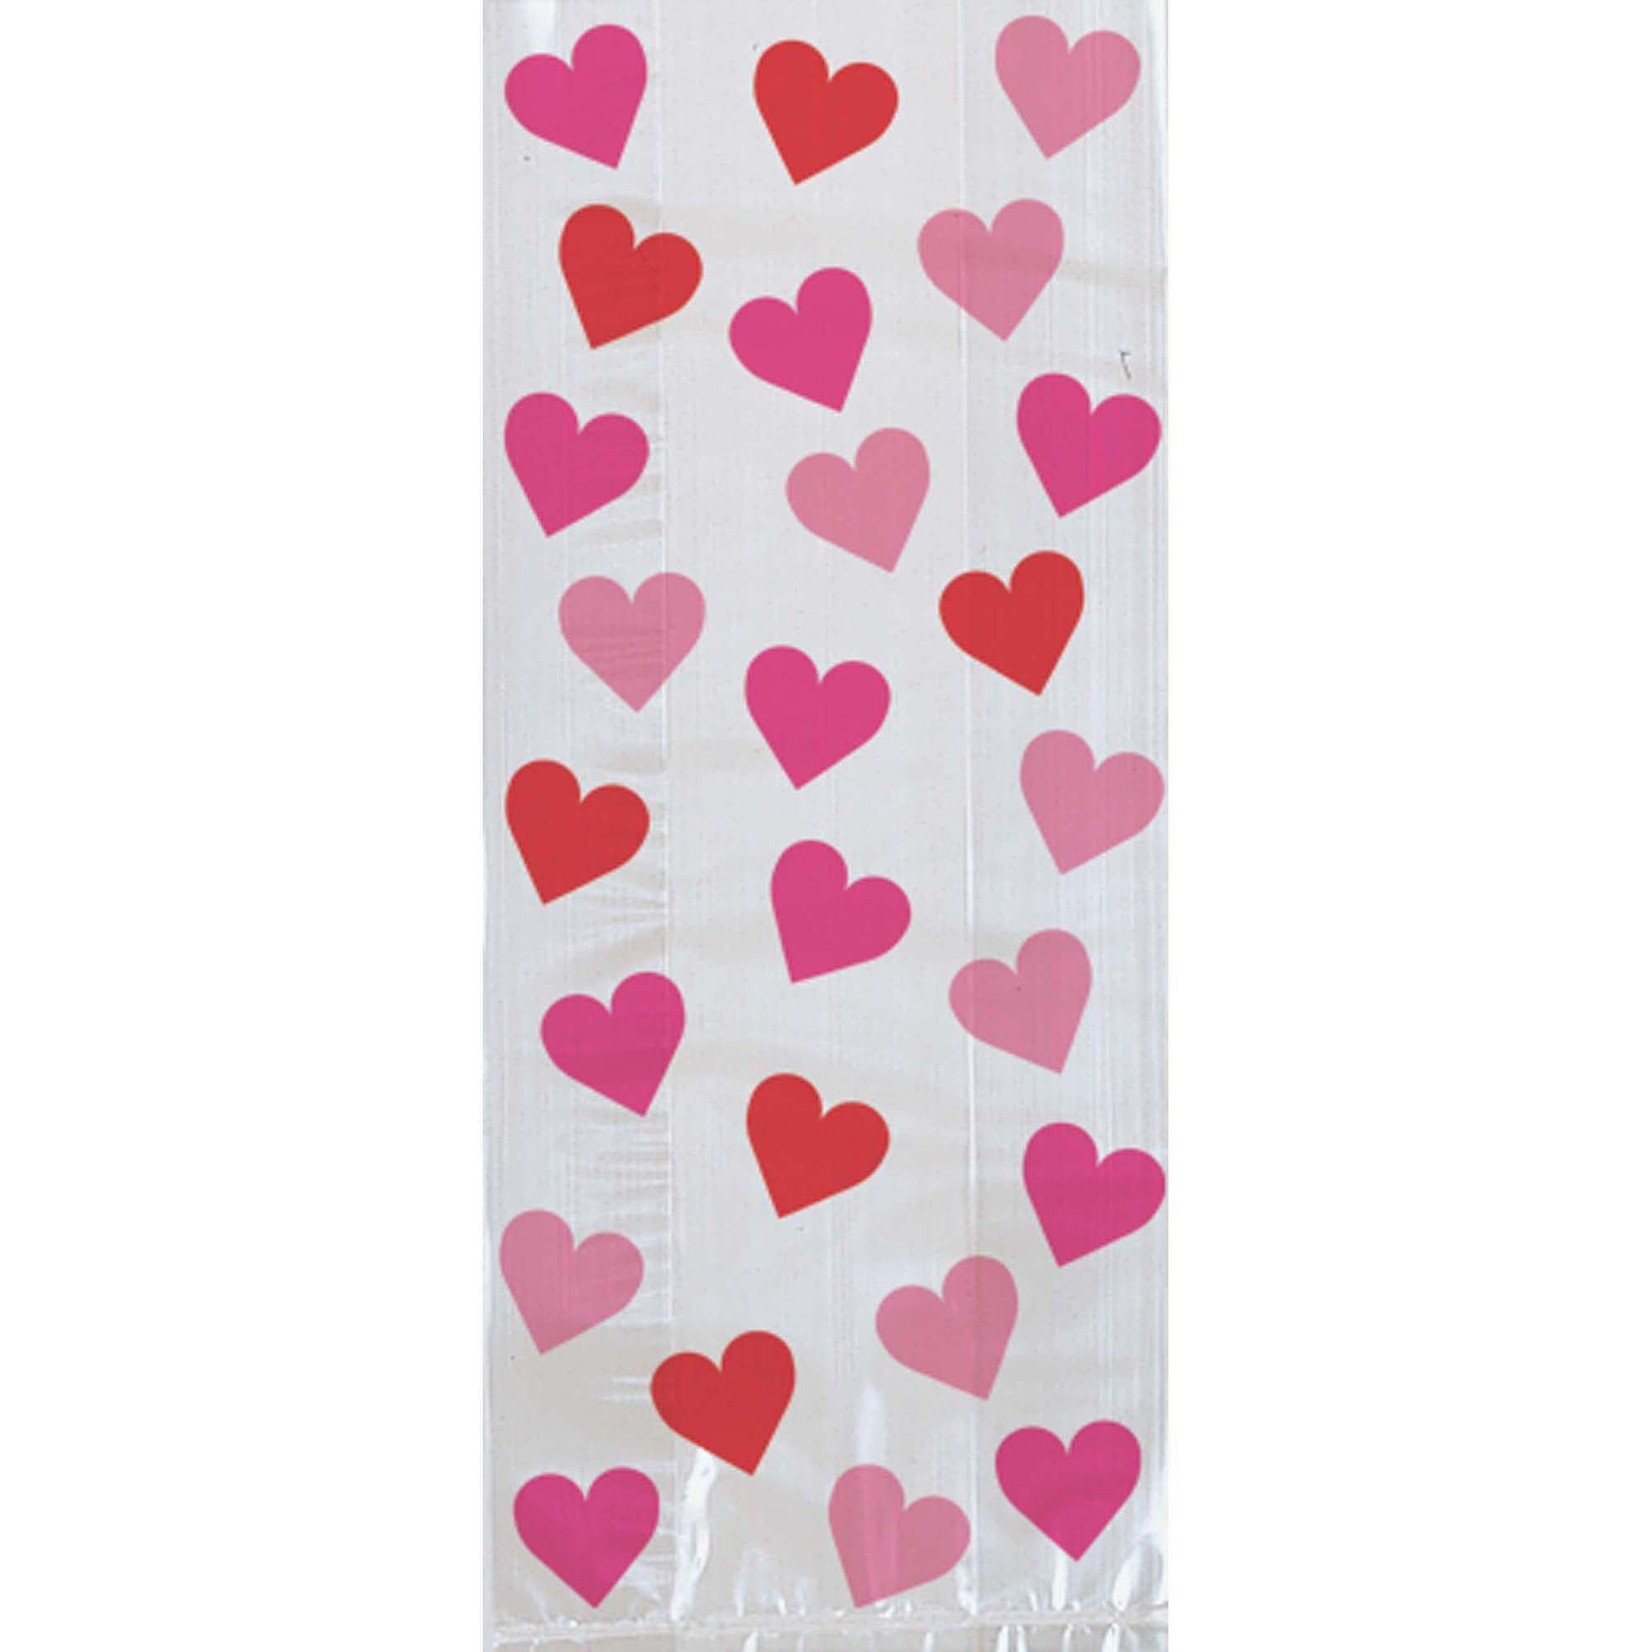 Amscan Small Pink Hearts Cellophane Bags - 20ct. (9.5"h x 4"w)